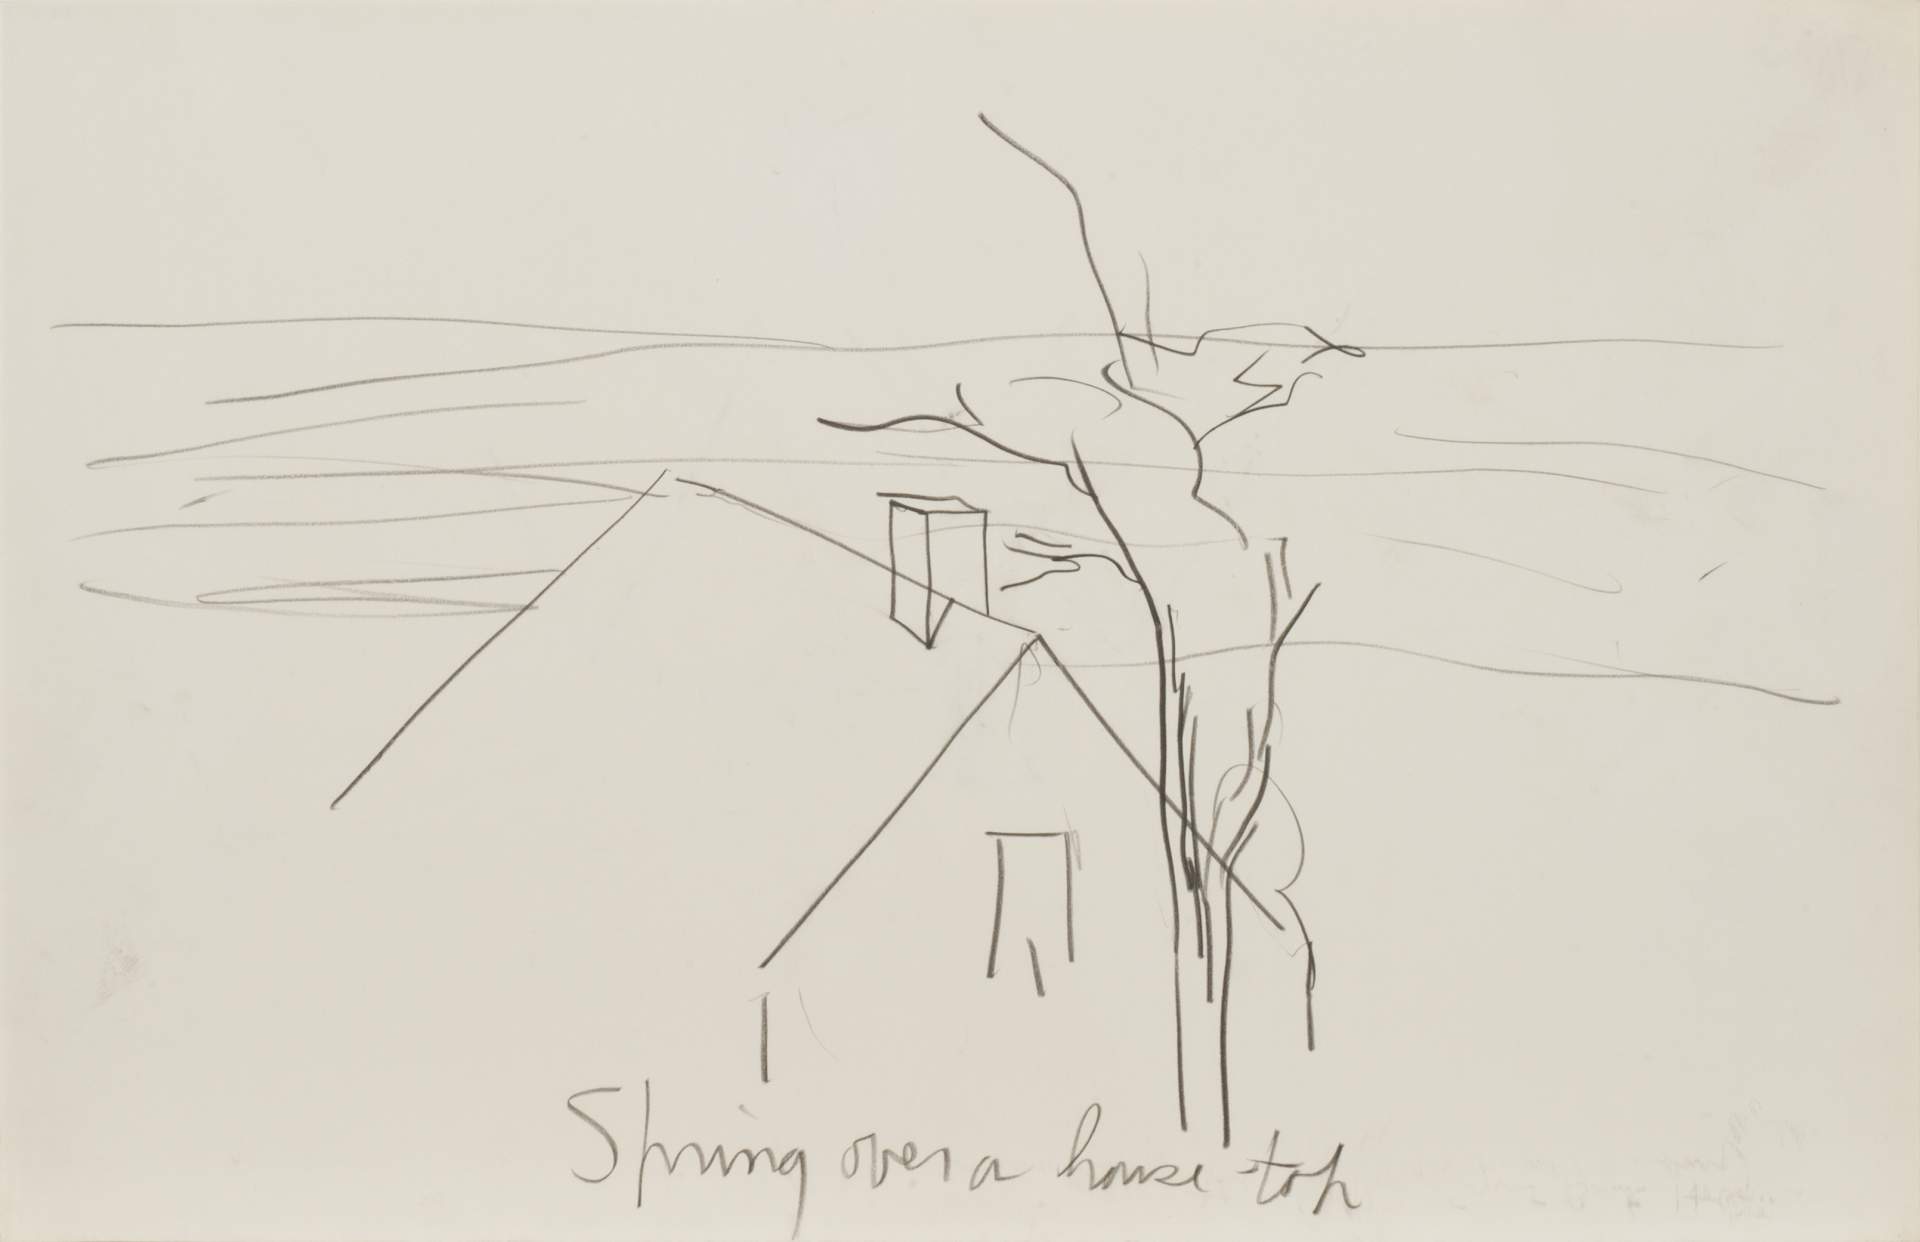 Untitled study with notation, "Spring over a house-top"